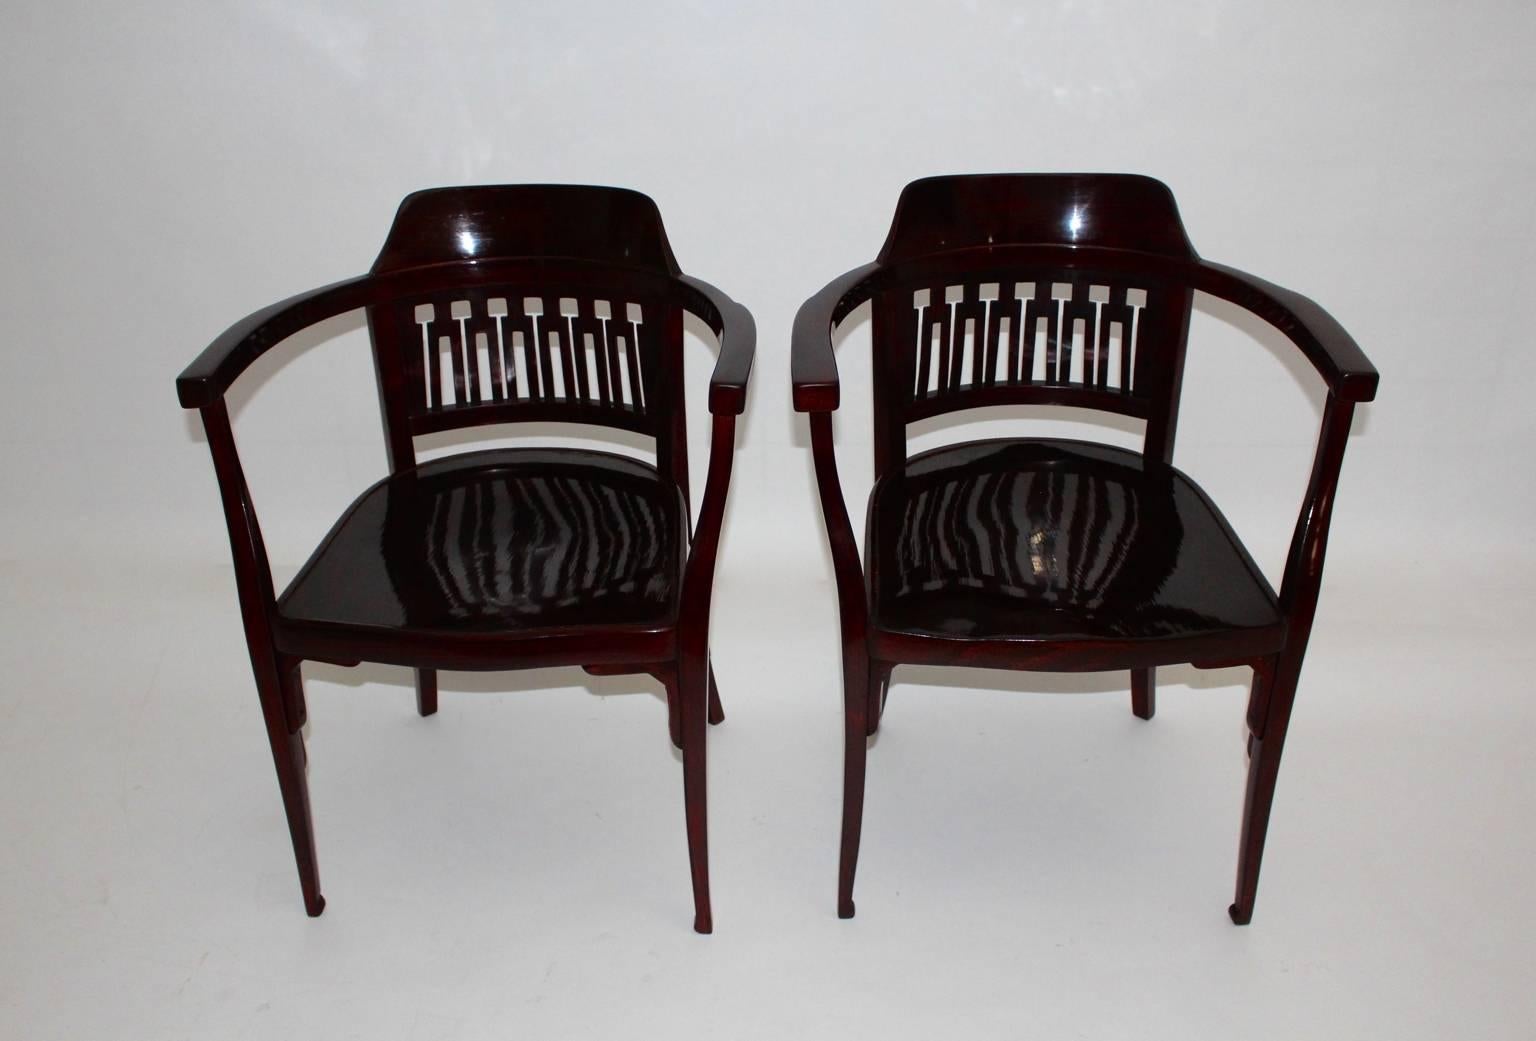 Jugendstil armchairs model no 714, which were designed Style Otto Wagner, Vienna, 1902 and produced by Jacob & Josef Kohn.
Documented in the company´s catalogue Kohn from 1903.
The chairs were made out of mahogany stained beechwood and shellac hand